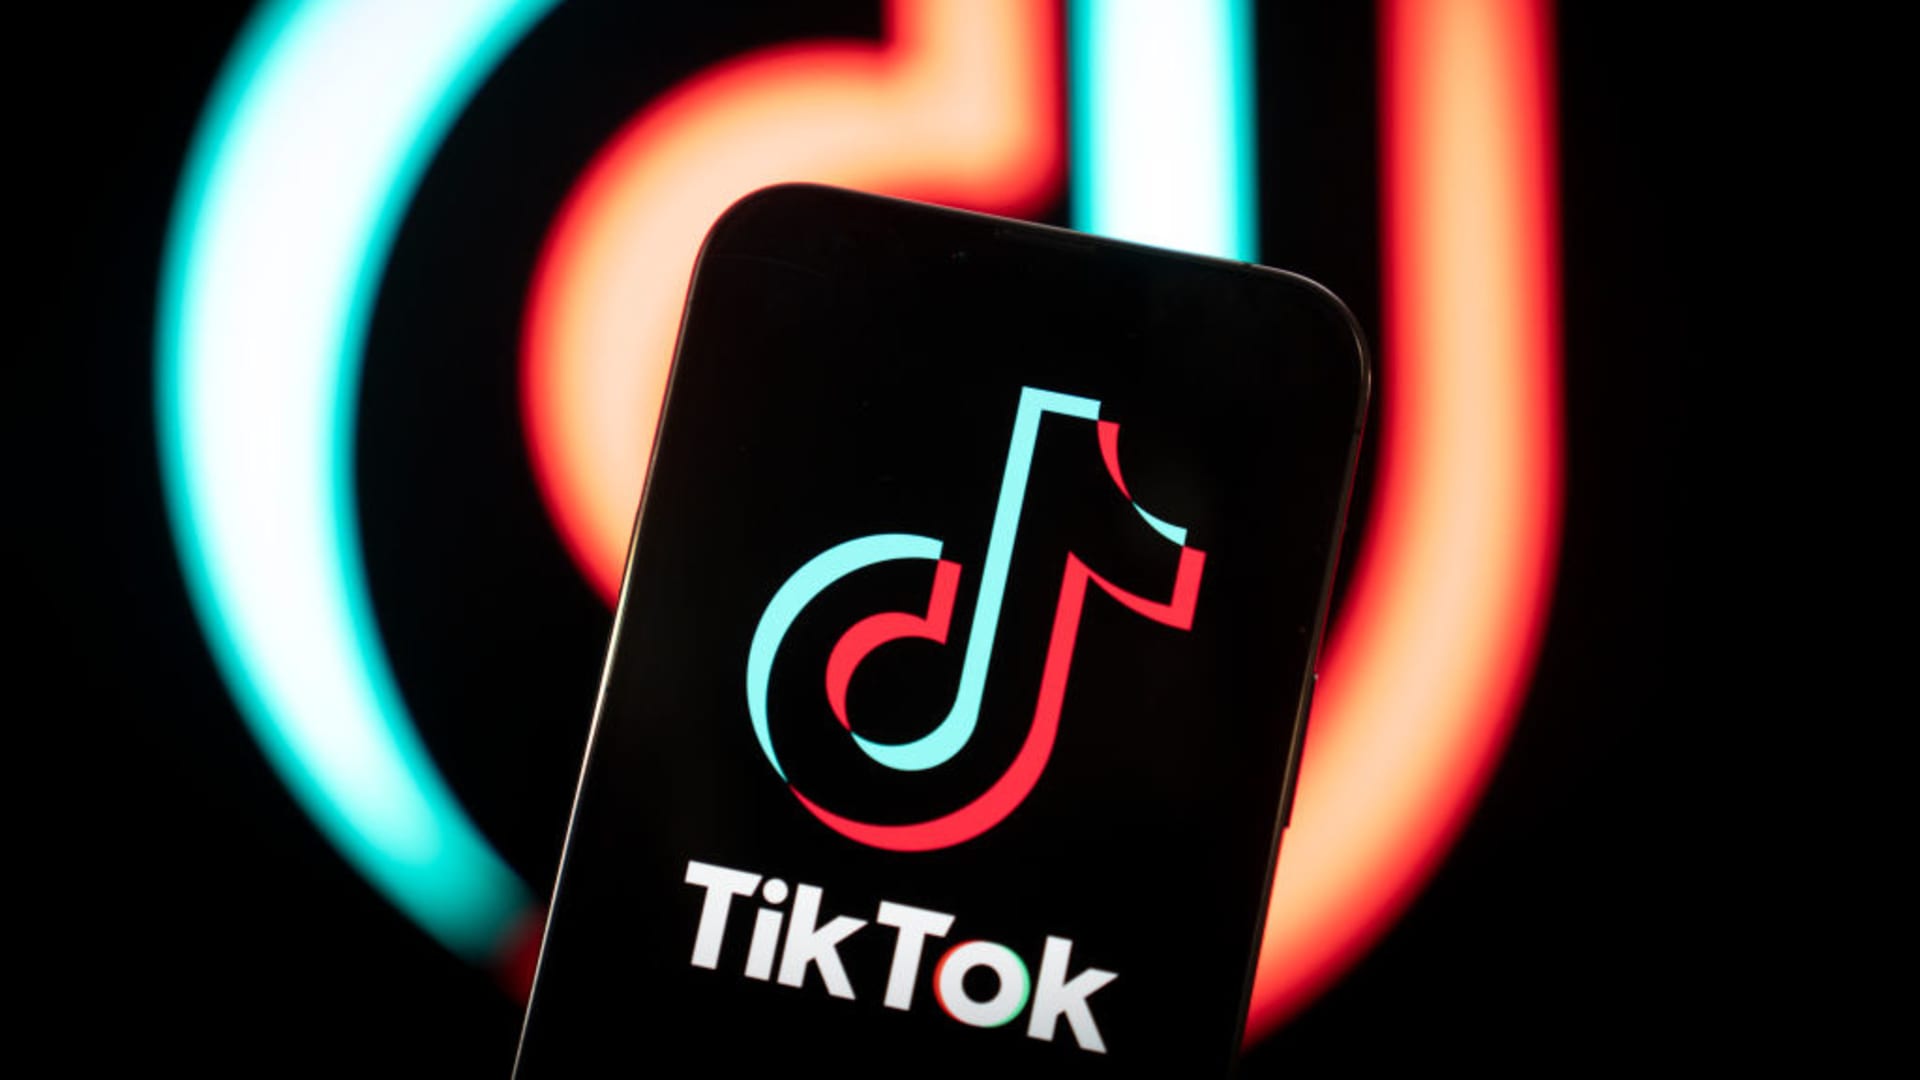 Biden says he’ll ban TikTok if Congress passes invoice, but he’s campaigning on it until then